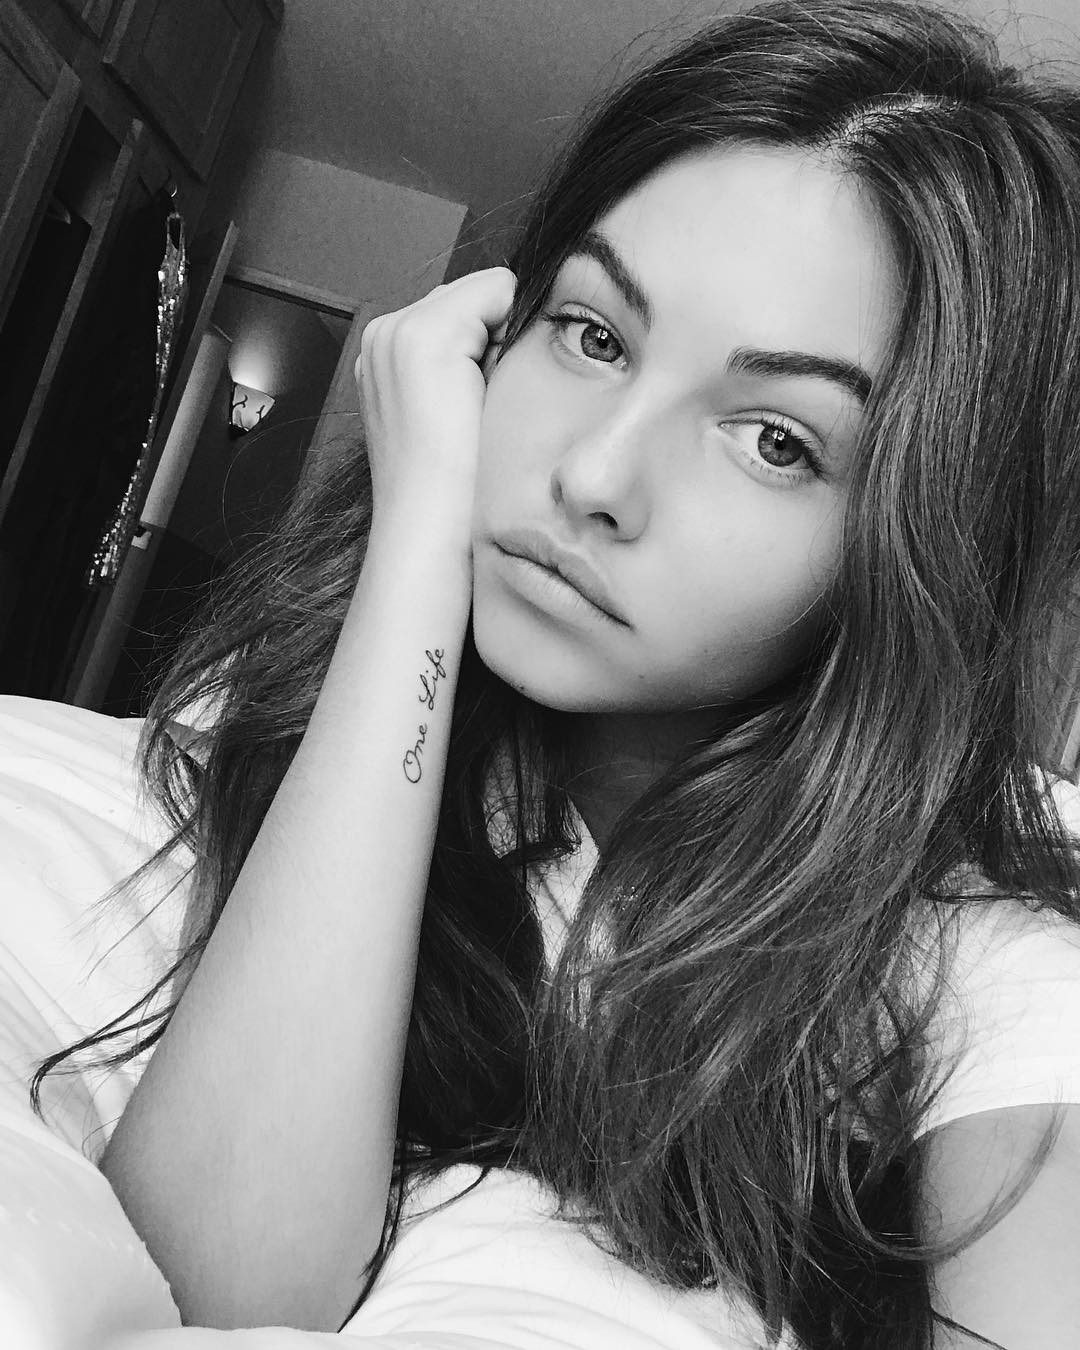 Picture tagged with: Skinny, Black and White, Brunette, Thylane Blondeau, Celebrity - Star, Cute, Eyes, French, Safe for work, Tattoo